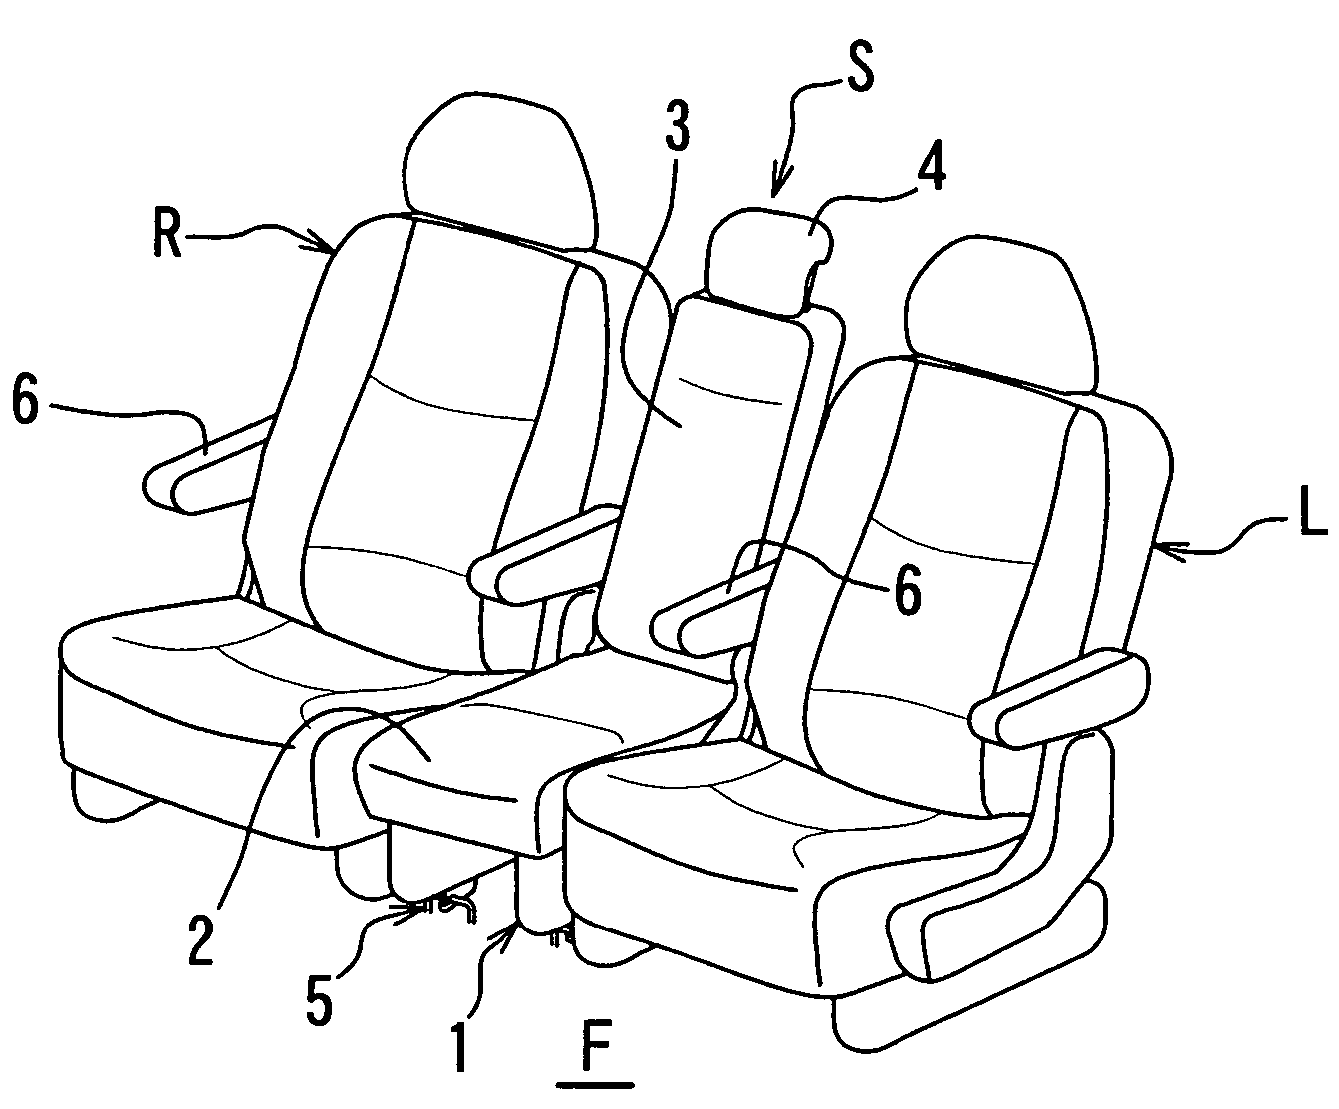 Detachable seat for vehicle